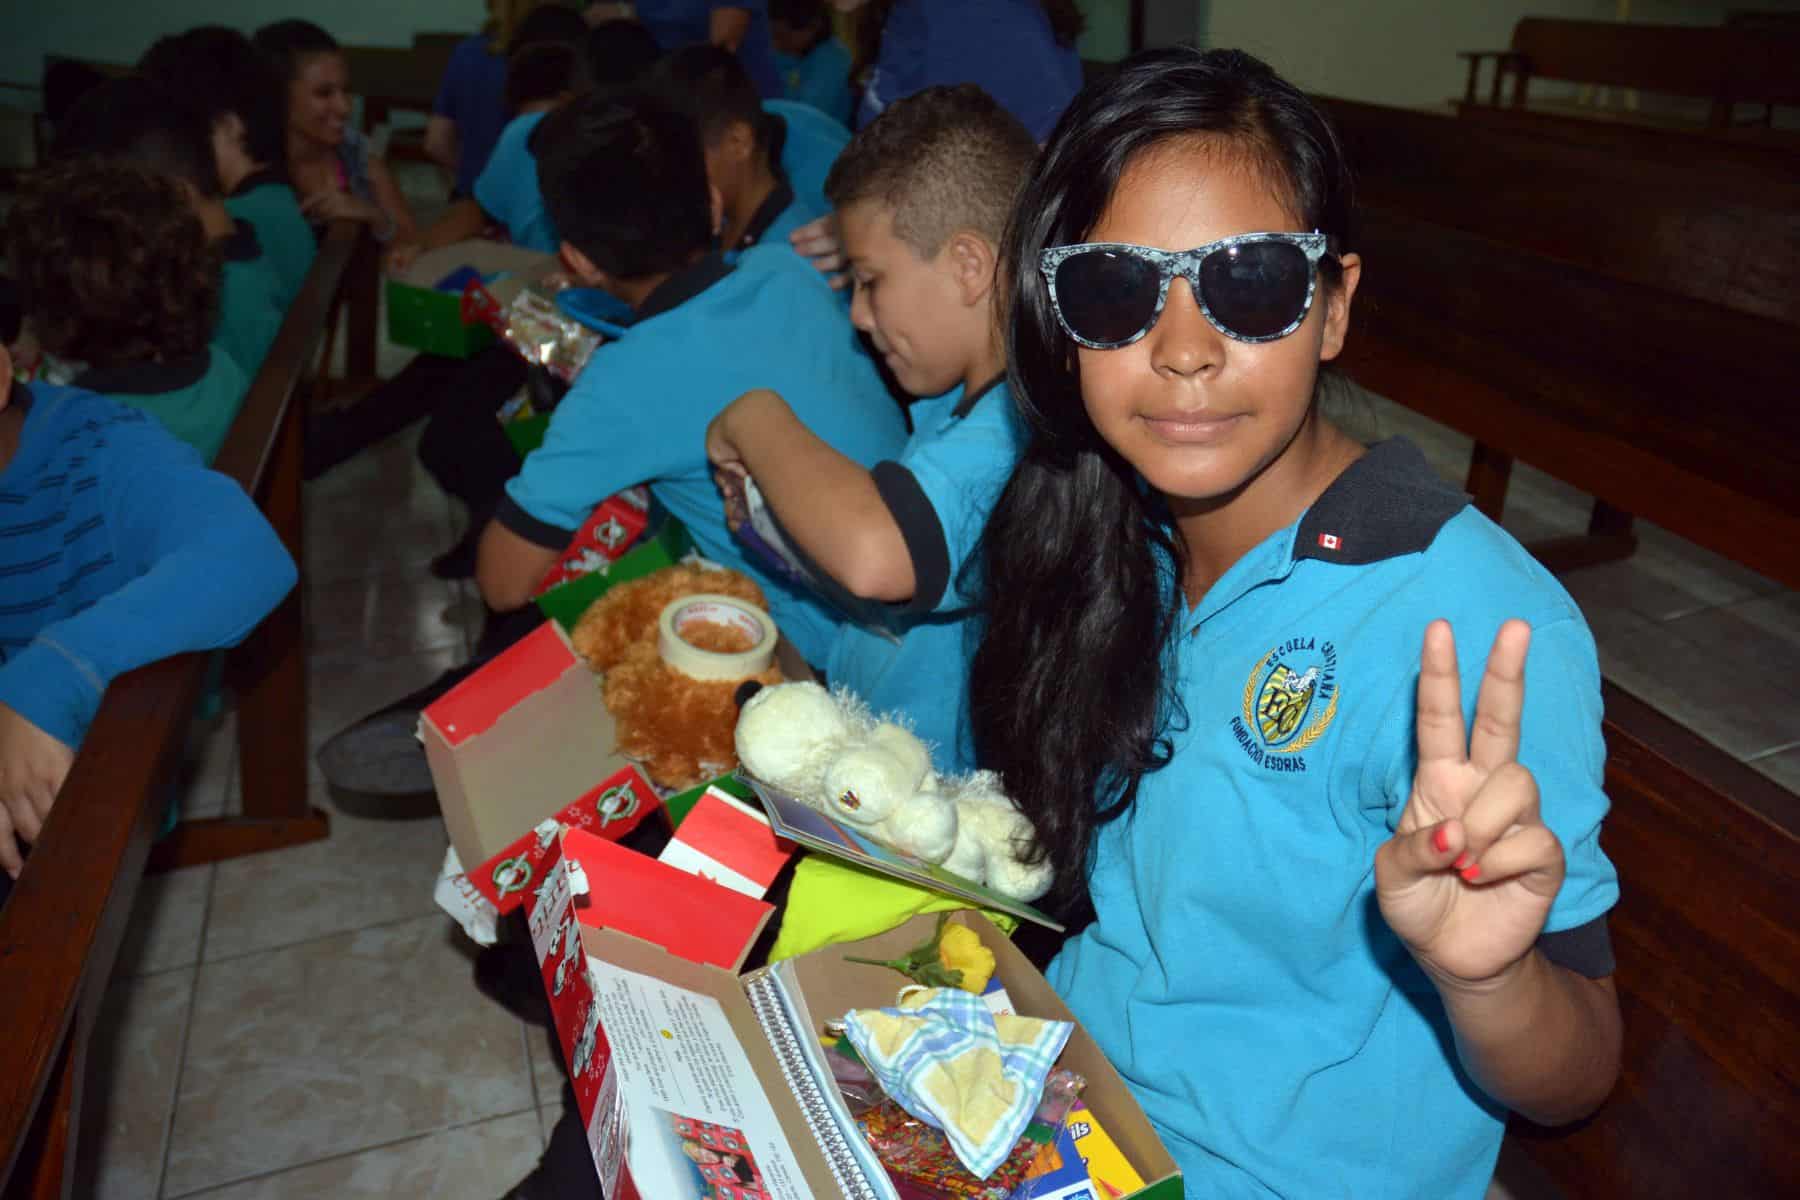 This girl in Costa Rica was excited to find new sunglasses in her gift-filled shoebox.